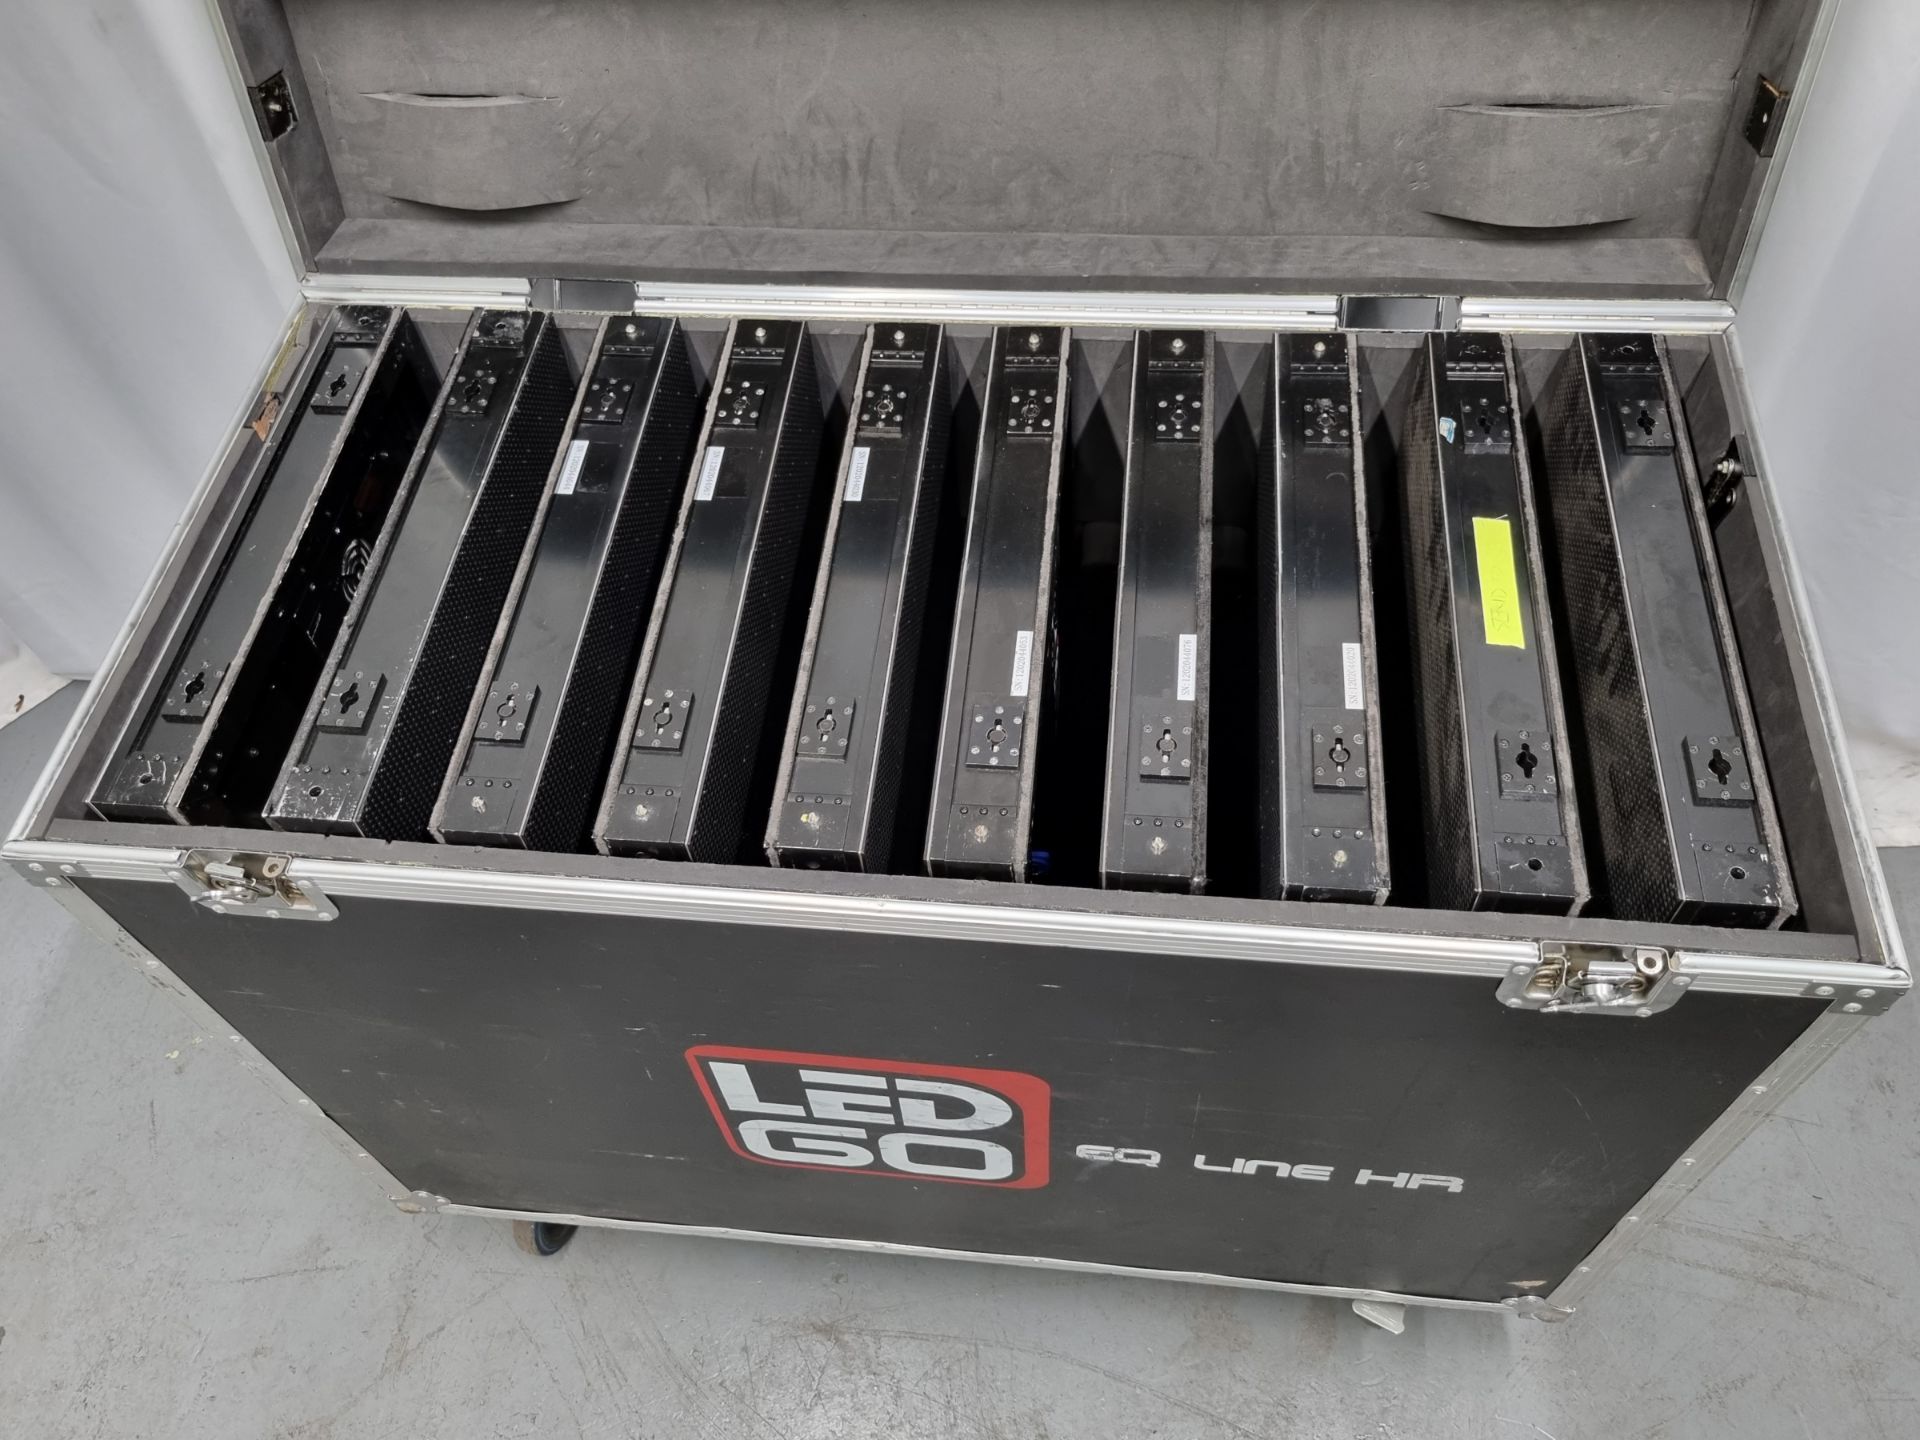 3x flight cases of LED GO 6mm EQ line video wall - 20x panels included - case sizes - W 1180 x D 555 - Image 8 of 12